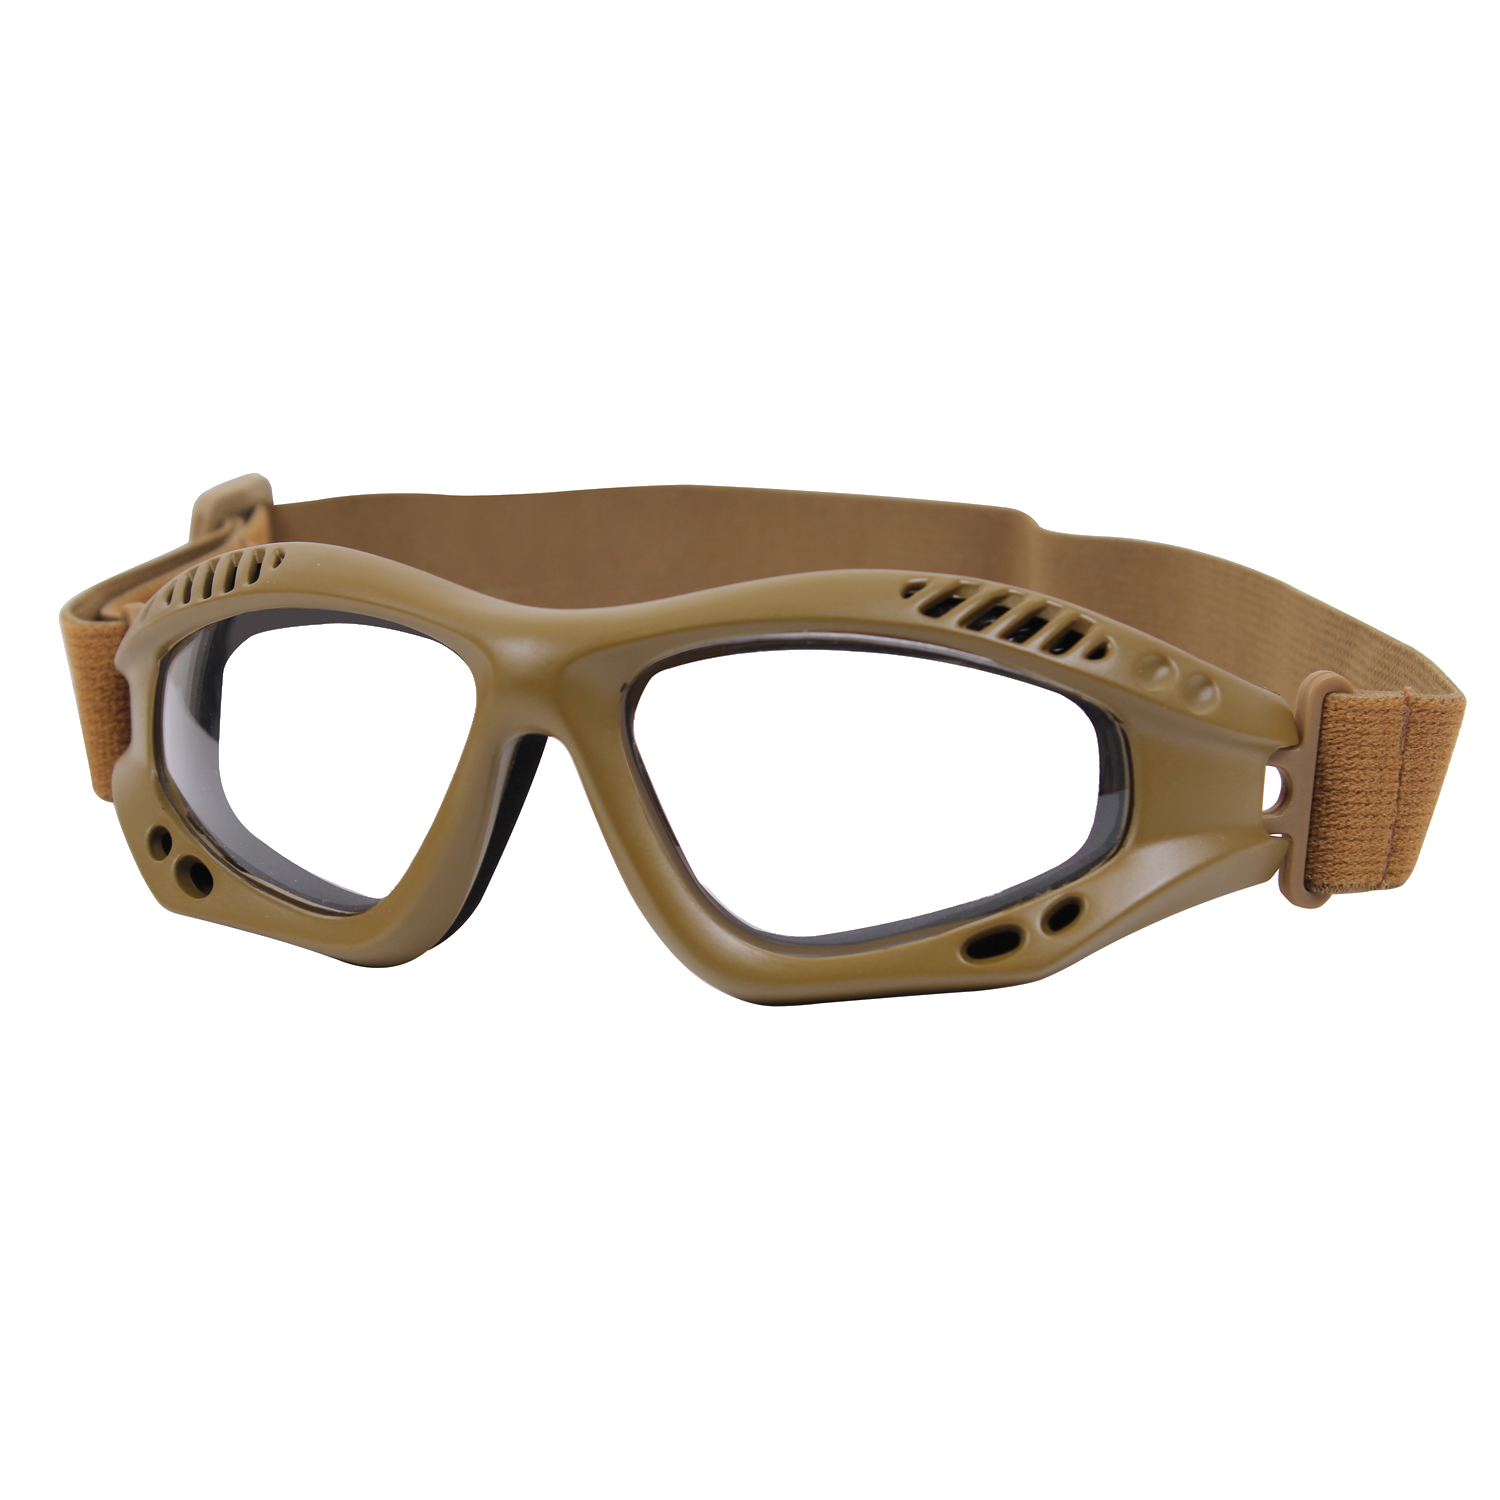 Rothco ANSI Rated Tactical Goggle Coyote (SG)